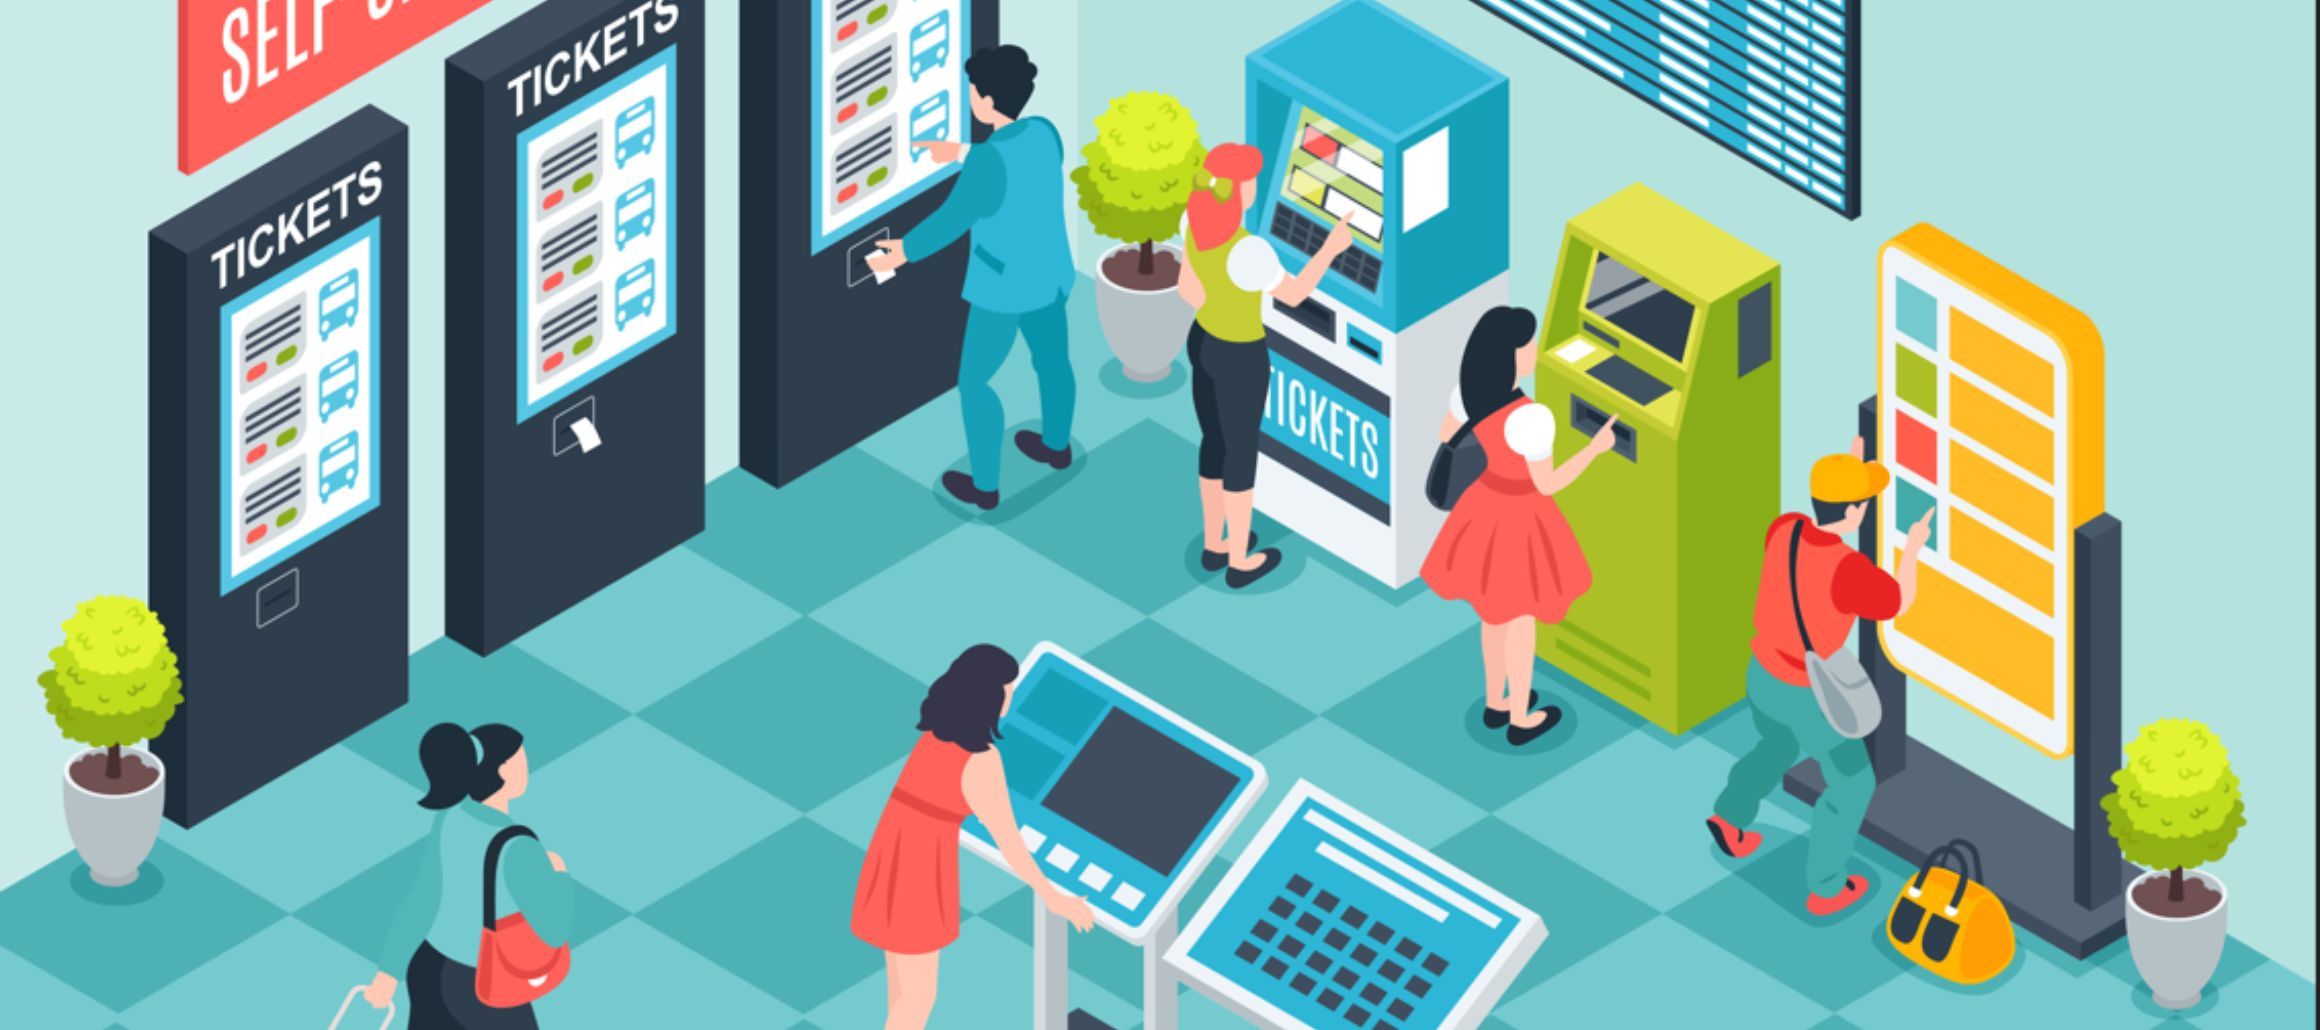 Streamlining the Shopping Experience: Queue Management with Digital Retail Signage